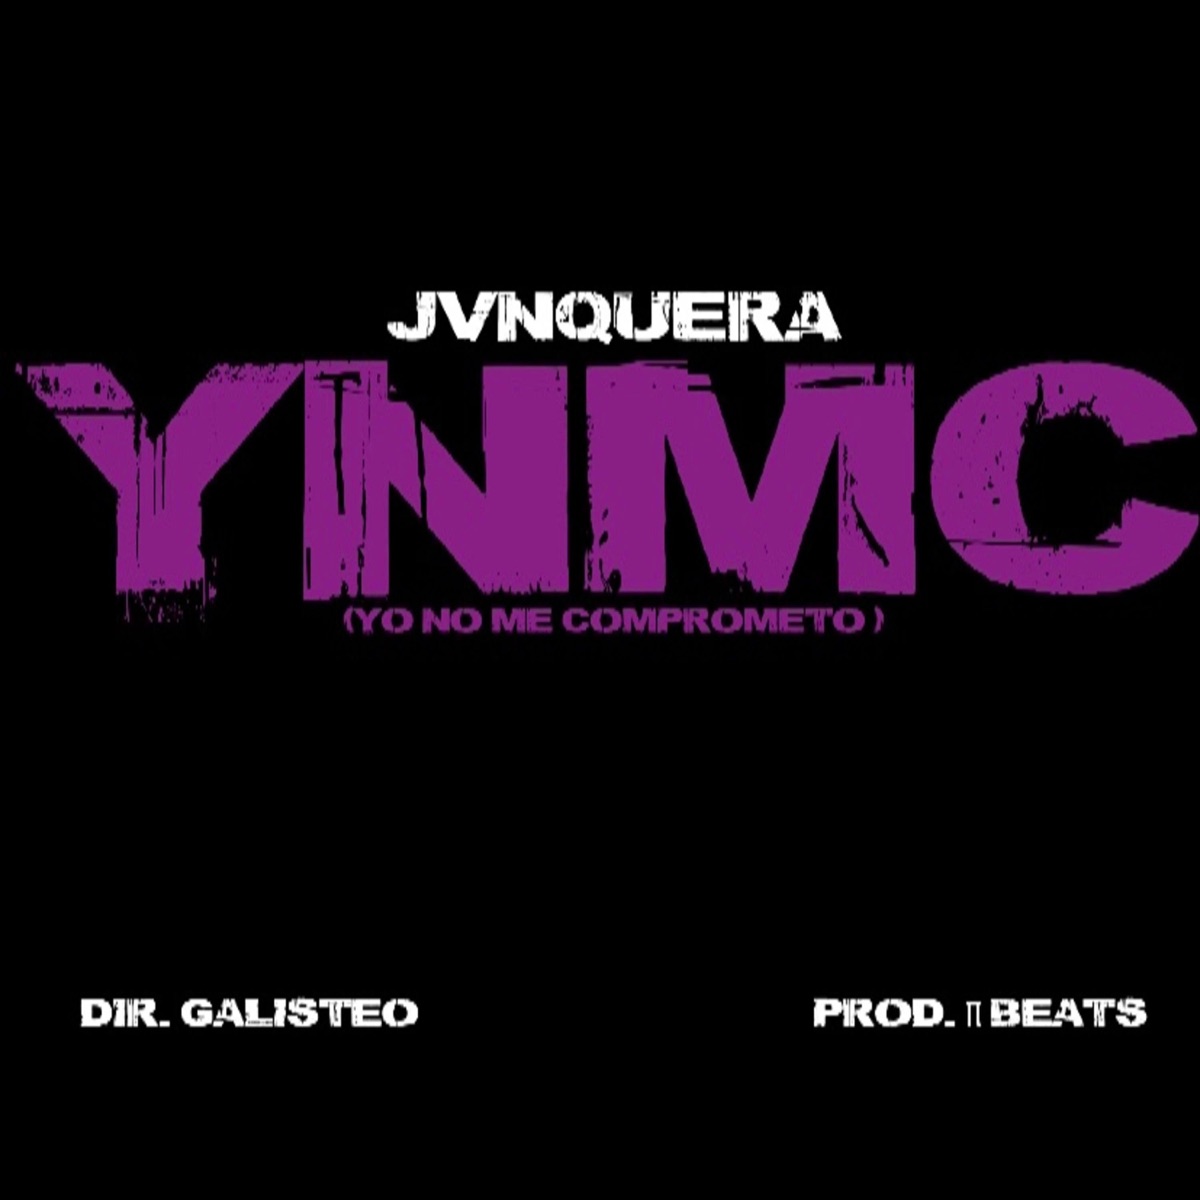 Xeques (feat. Jay Vázquez, Bad Fifty, N-Jey, Papi Paler, Itsmustanigga, π  Beats & La Visión) – Song by Jvnquera – Apple Music